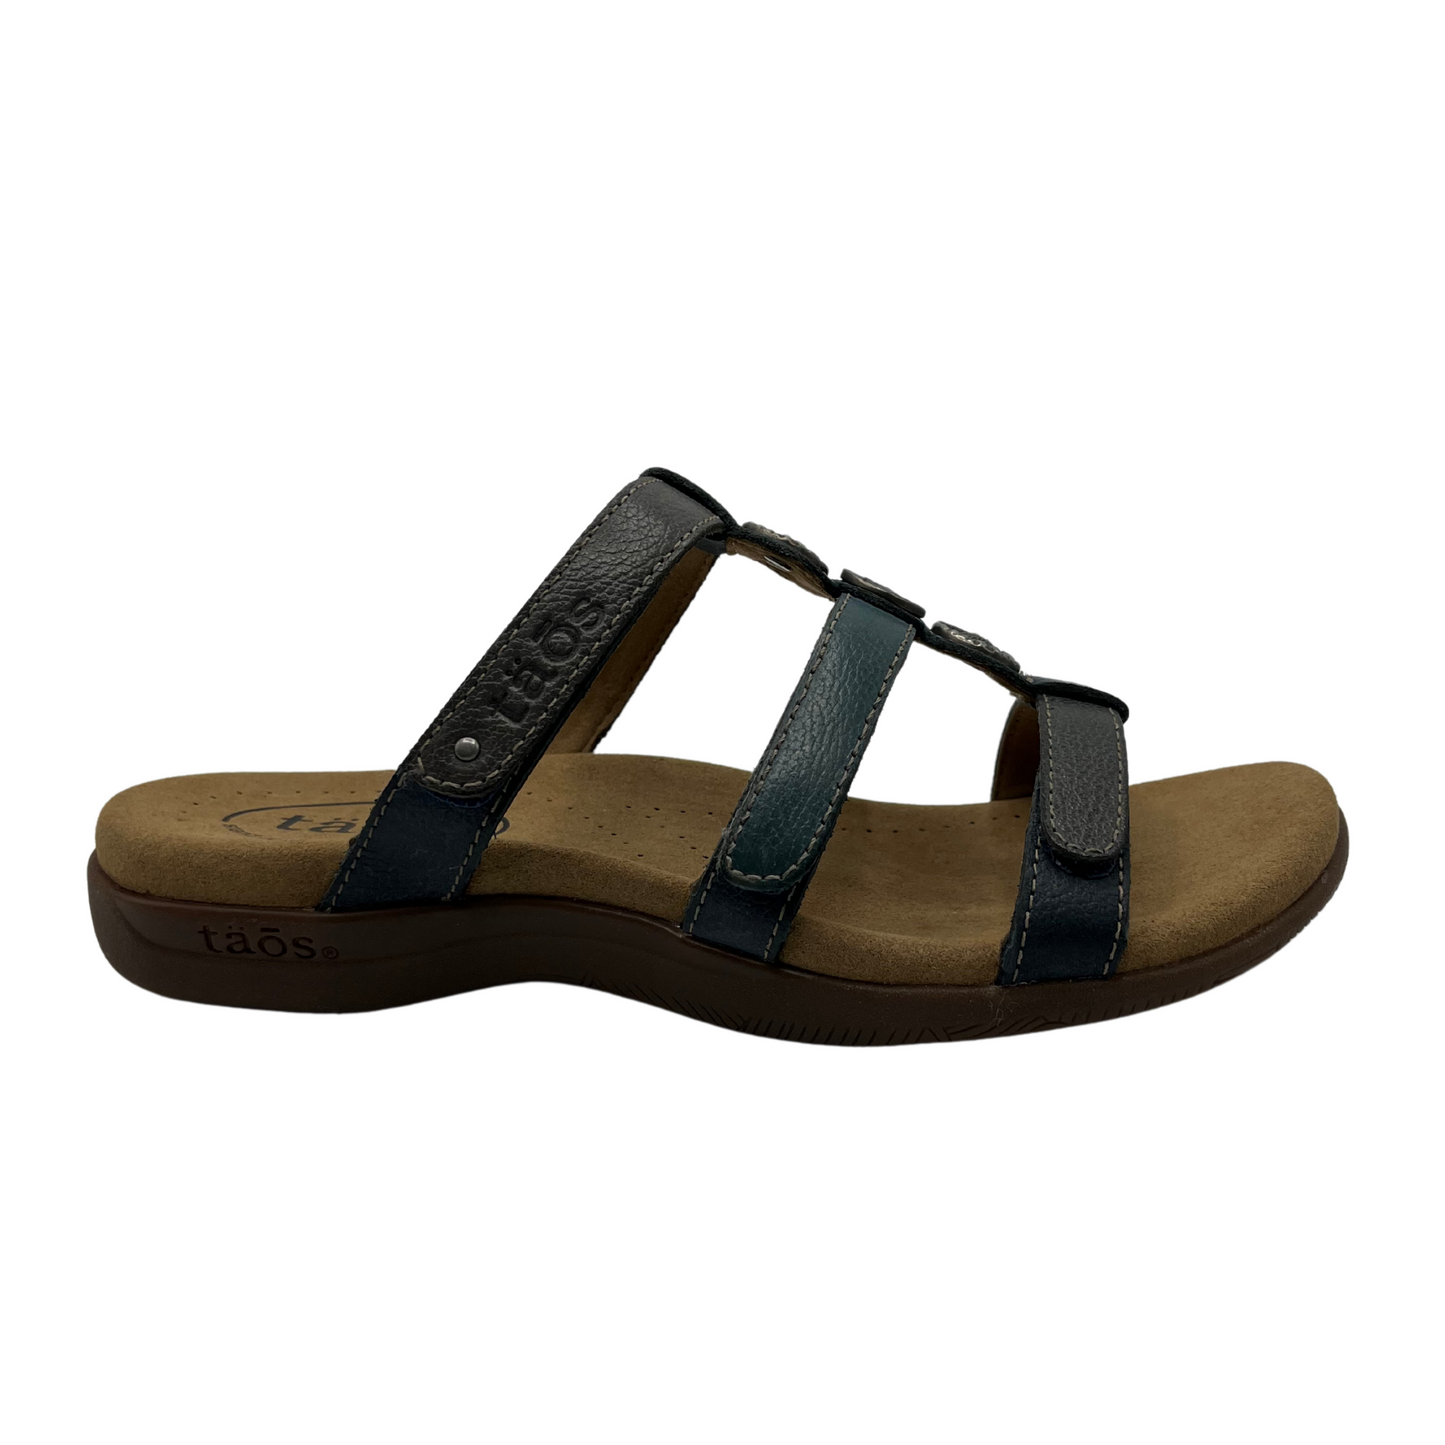 Right facing view of leather sandal with 3 straps and slip on style. Hook and loop closures on straps and lined anatomical footbed